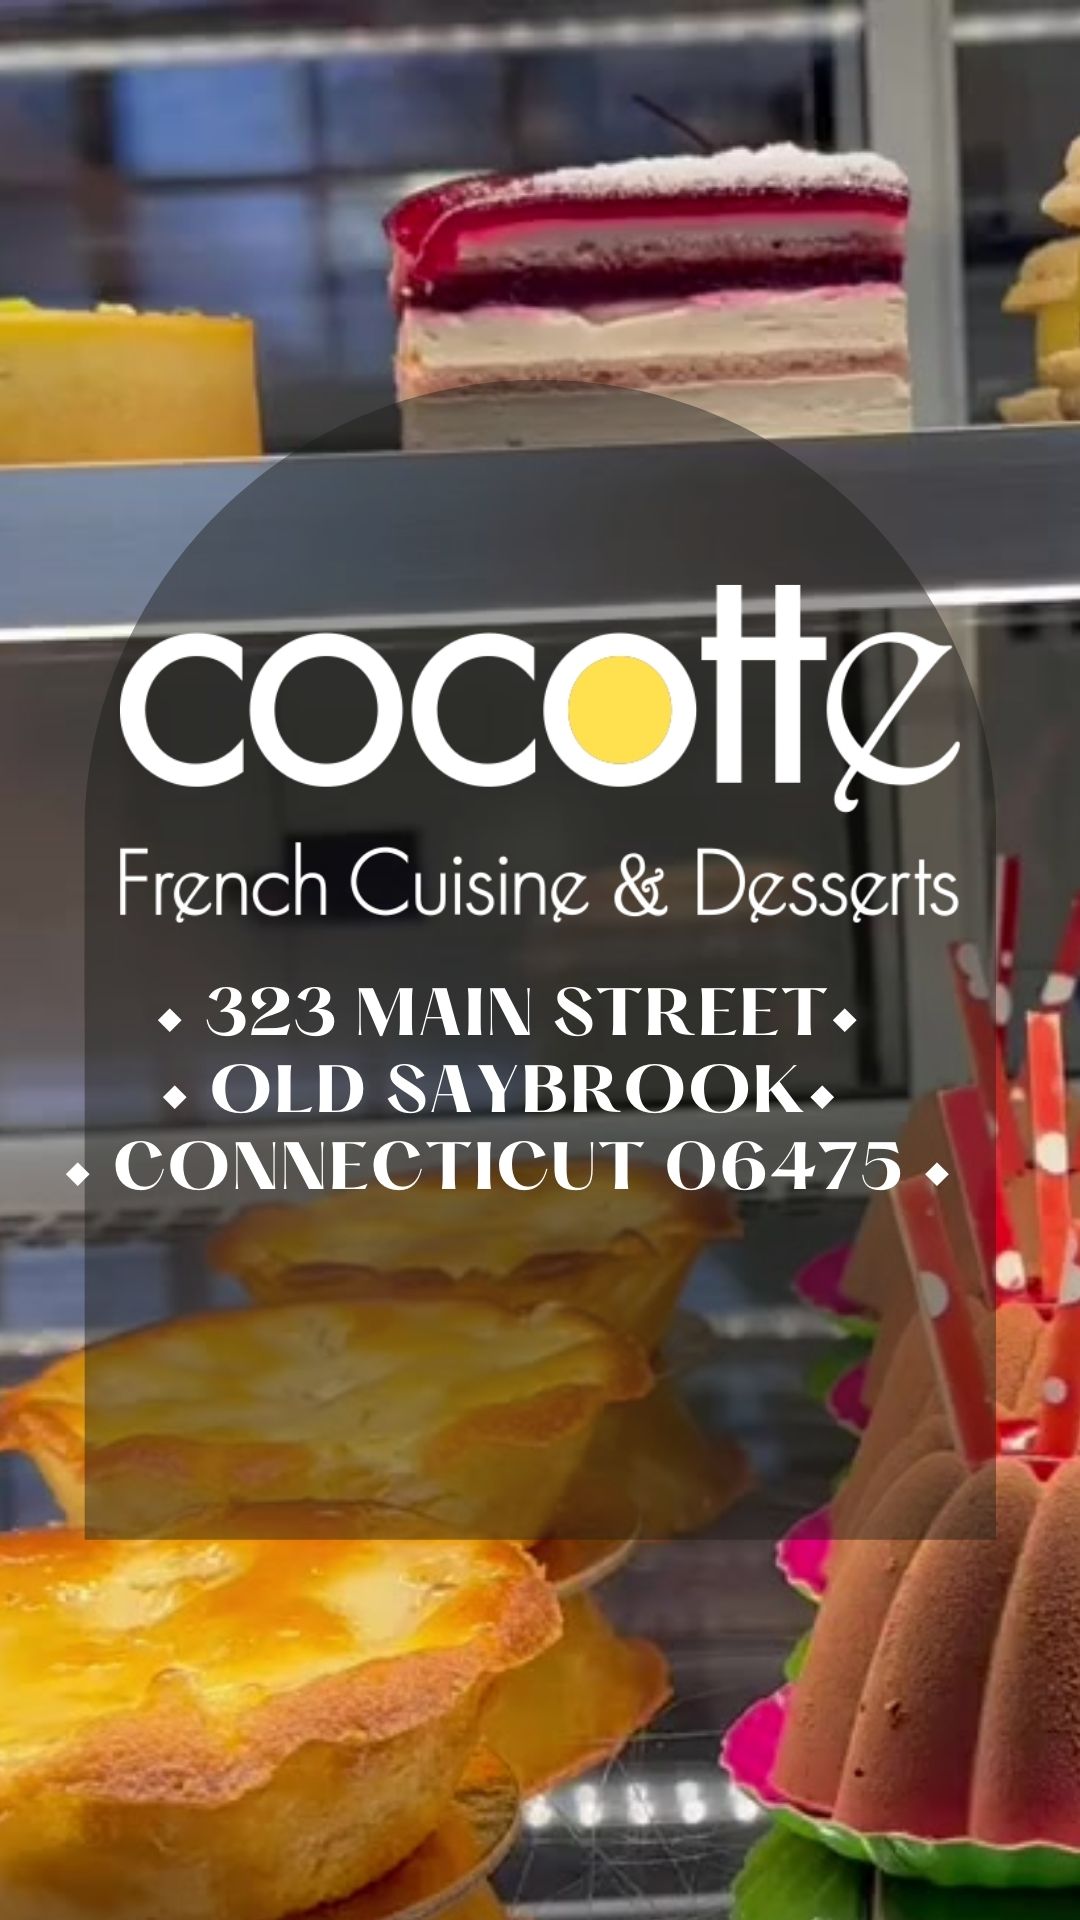 Image for Member Monday: Cocotte at James Pharmacy